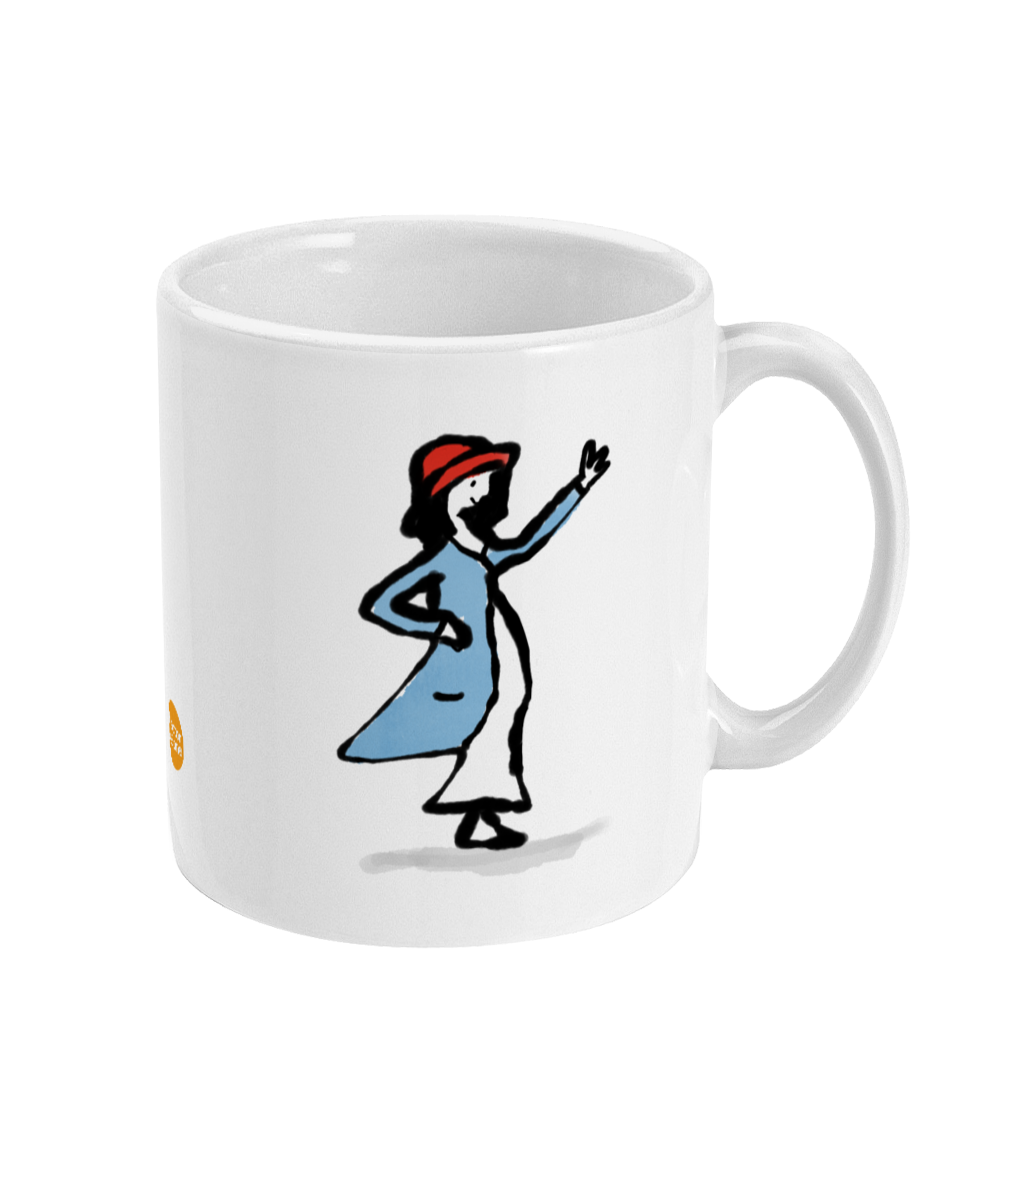 Waving Girl coffee mug design by Hector and Bone Right View